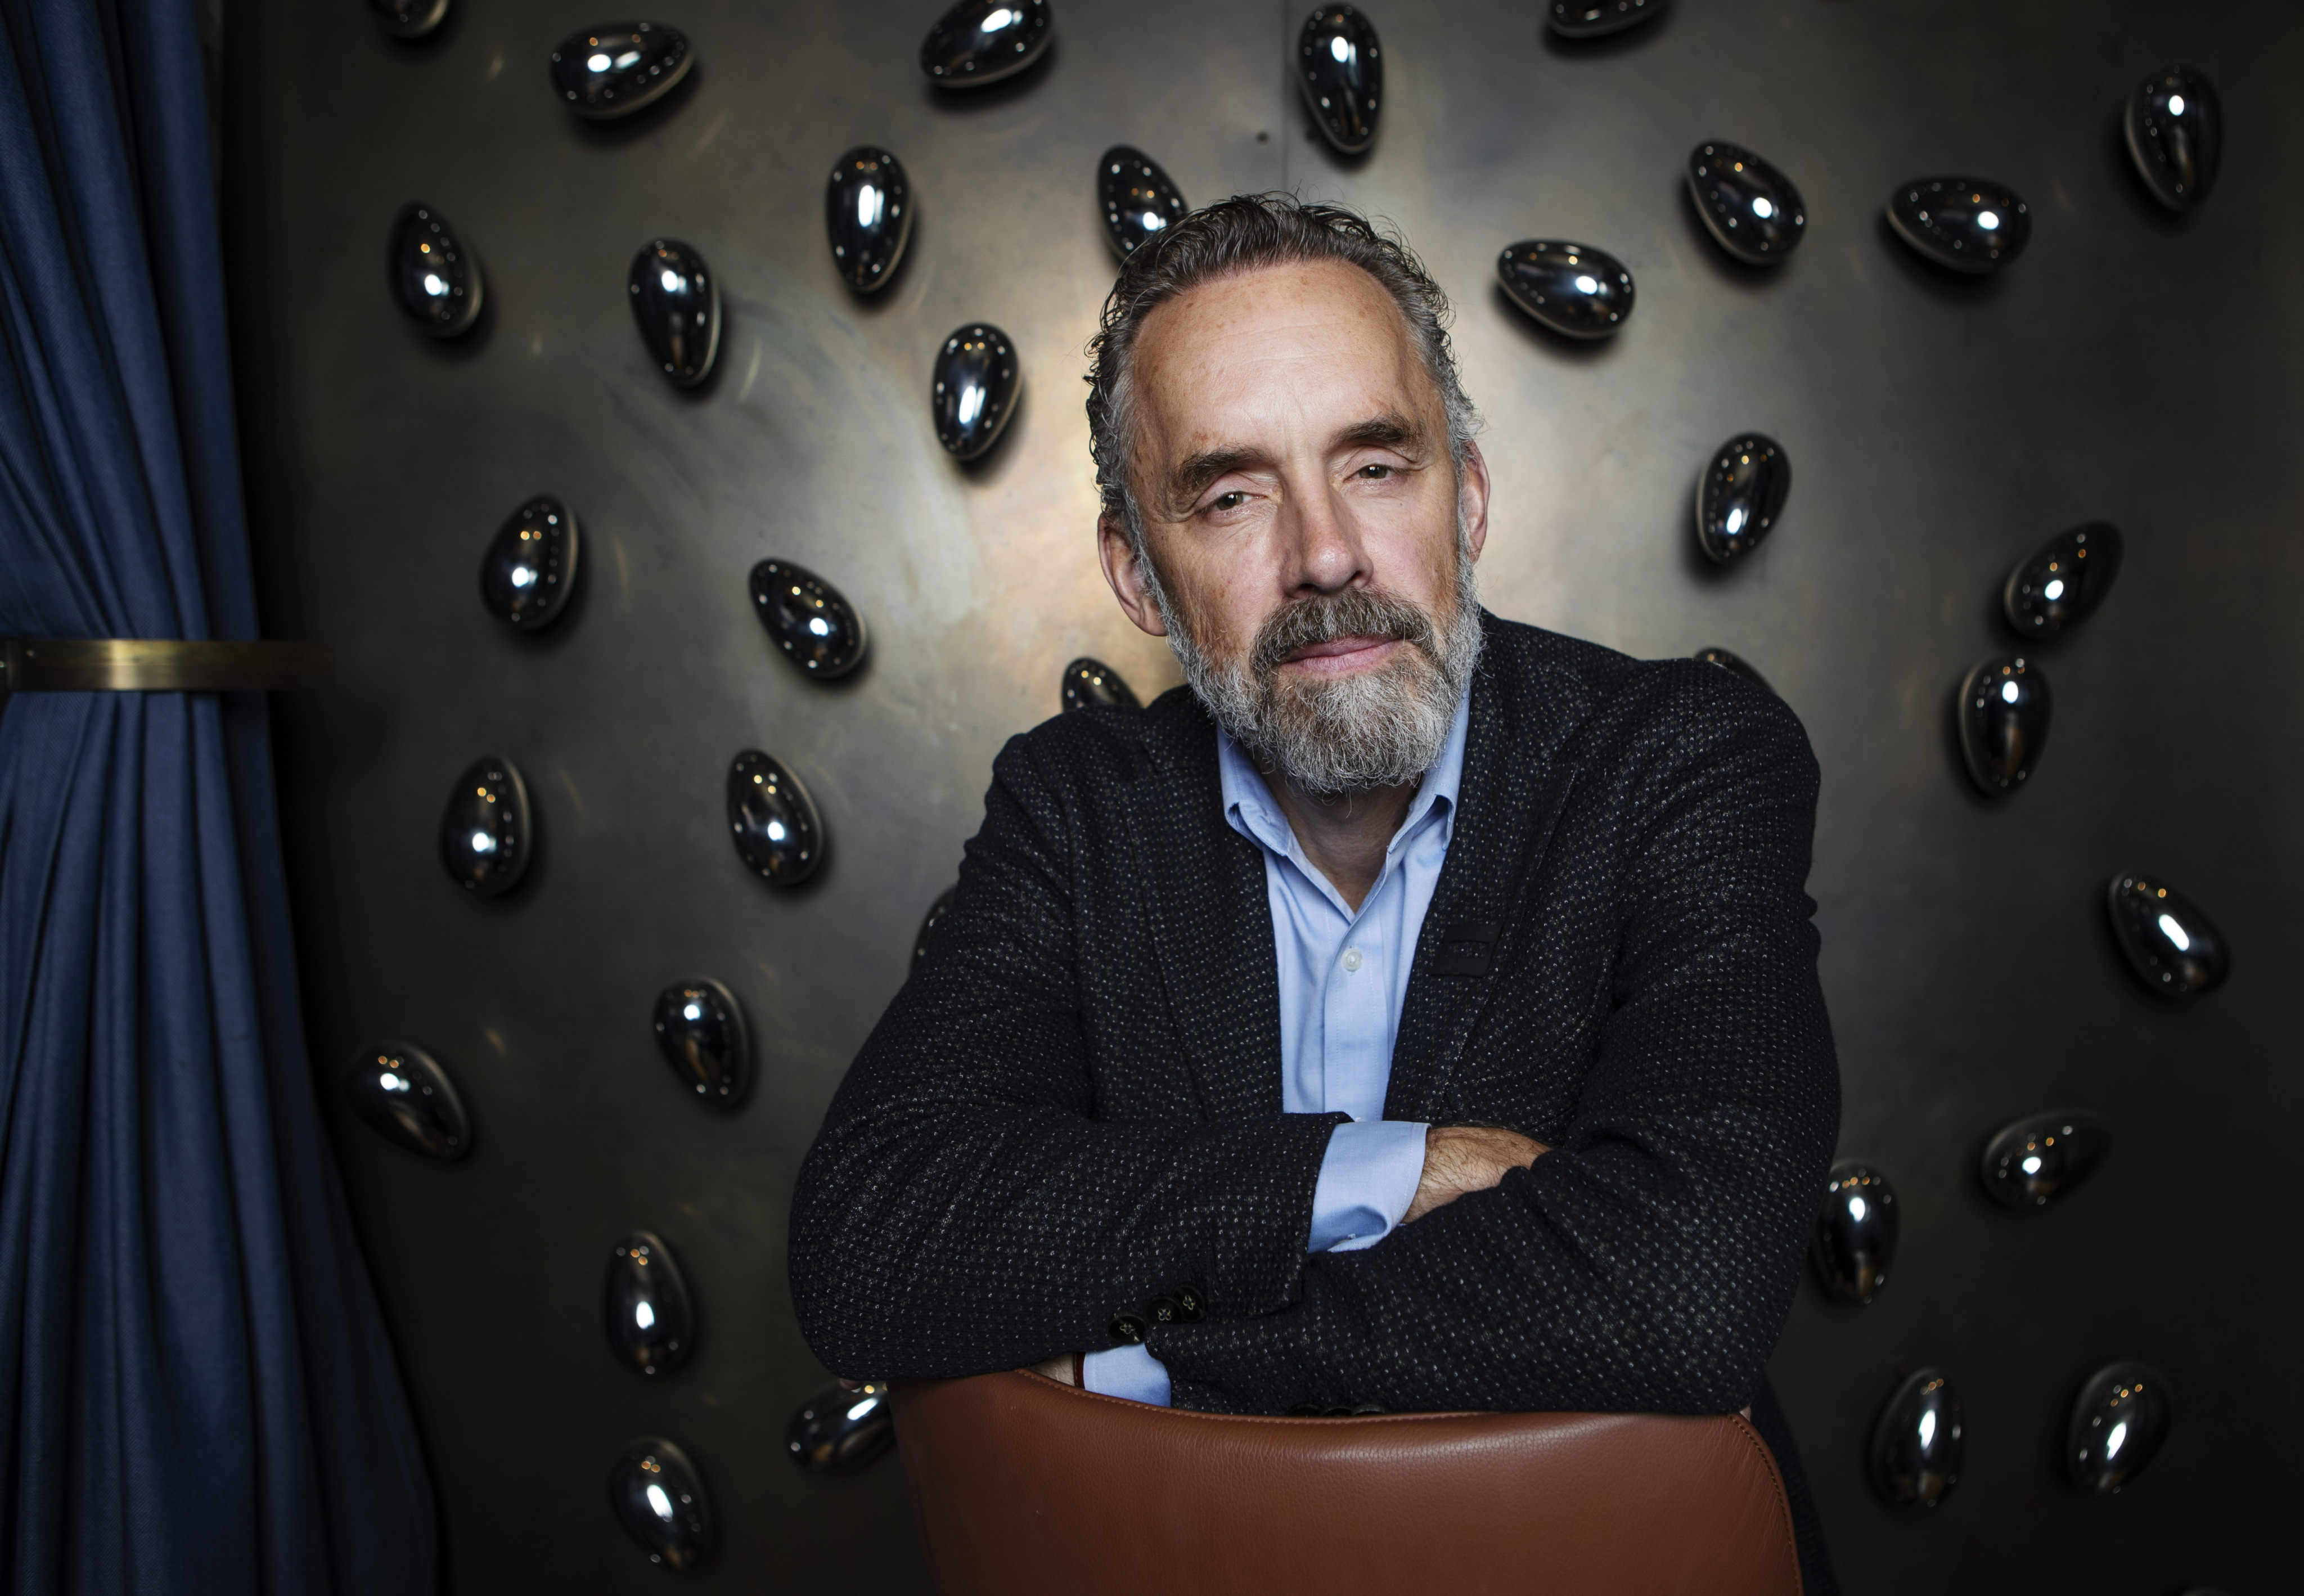 Clinical psychologist Jordan Peterson poses during a photo shoot in Sydney. Photo: Getty Images